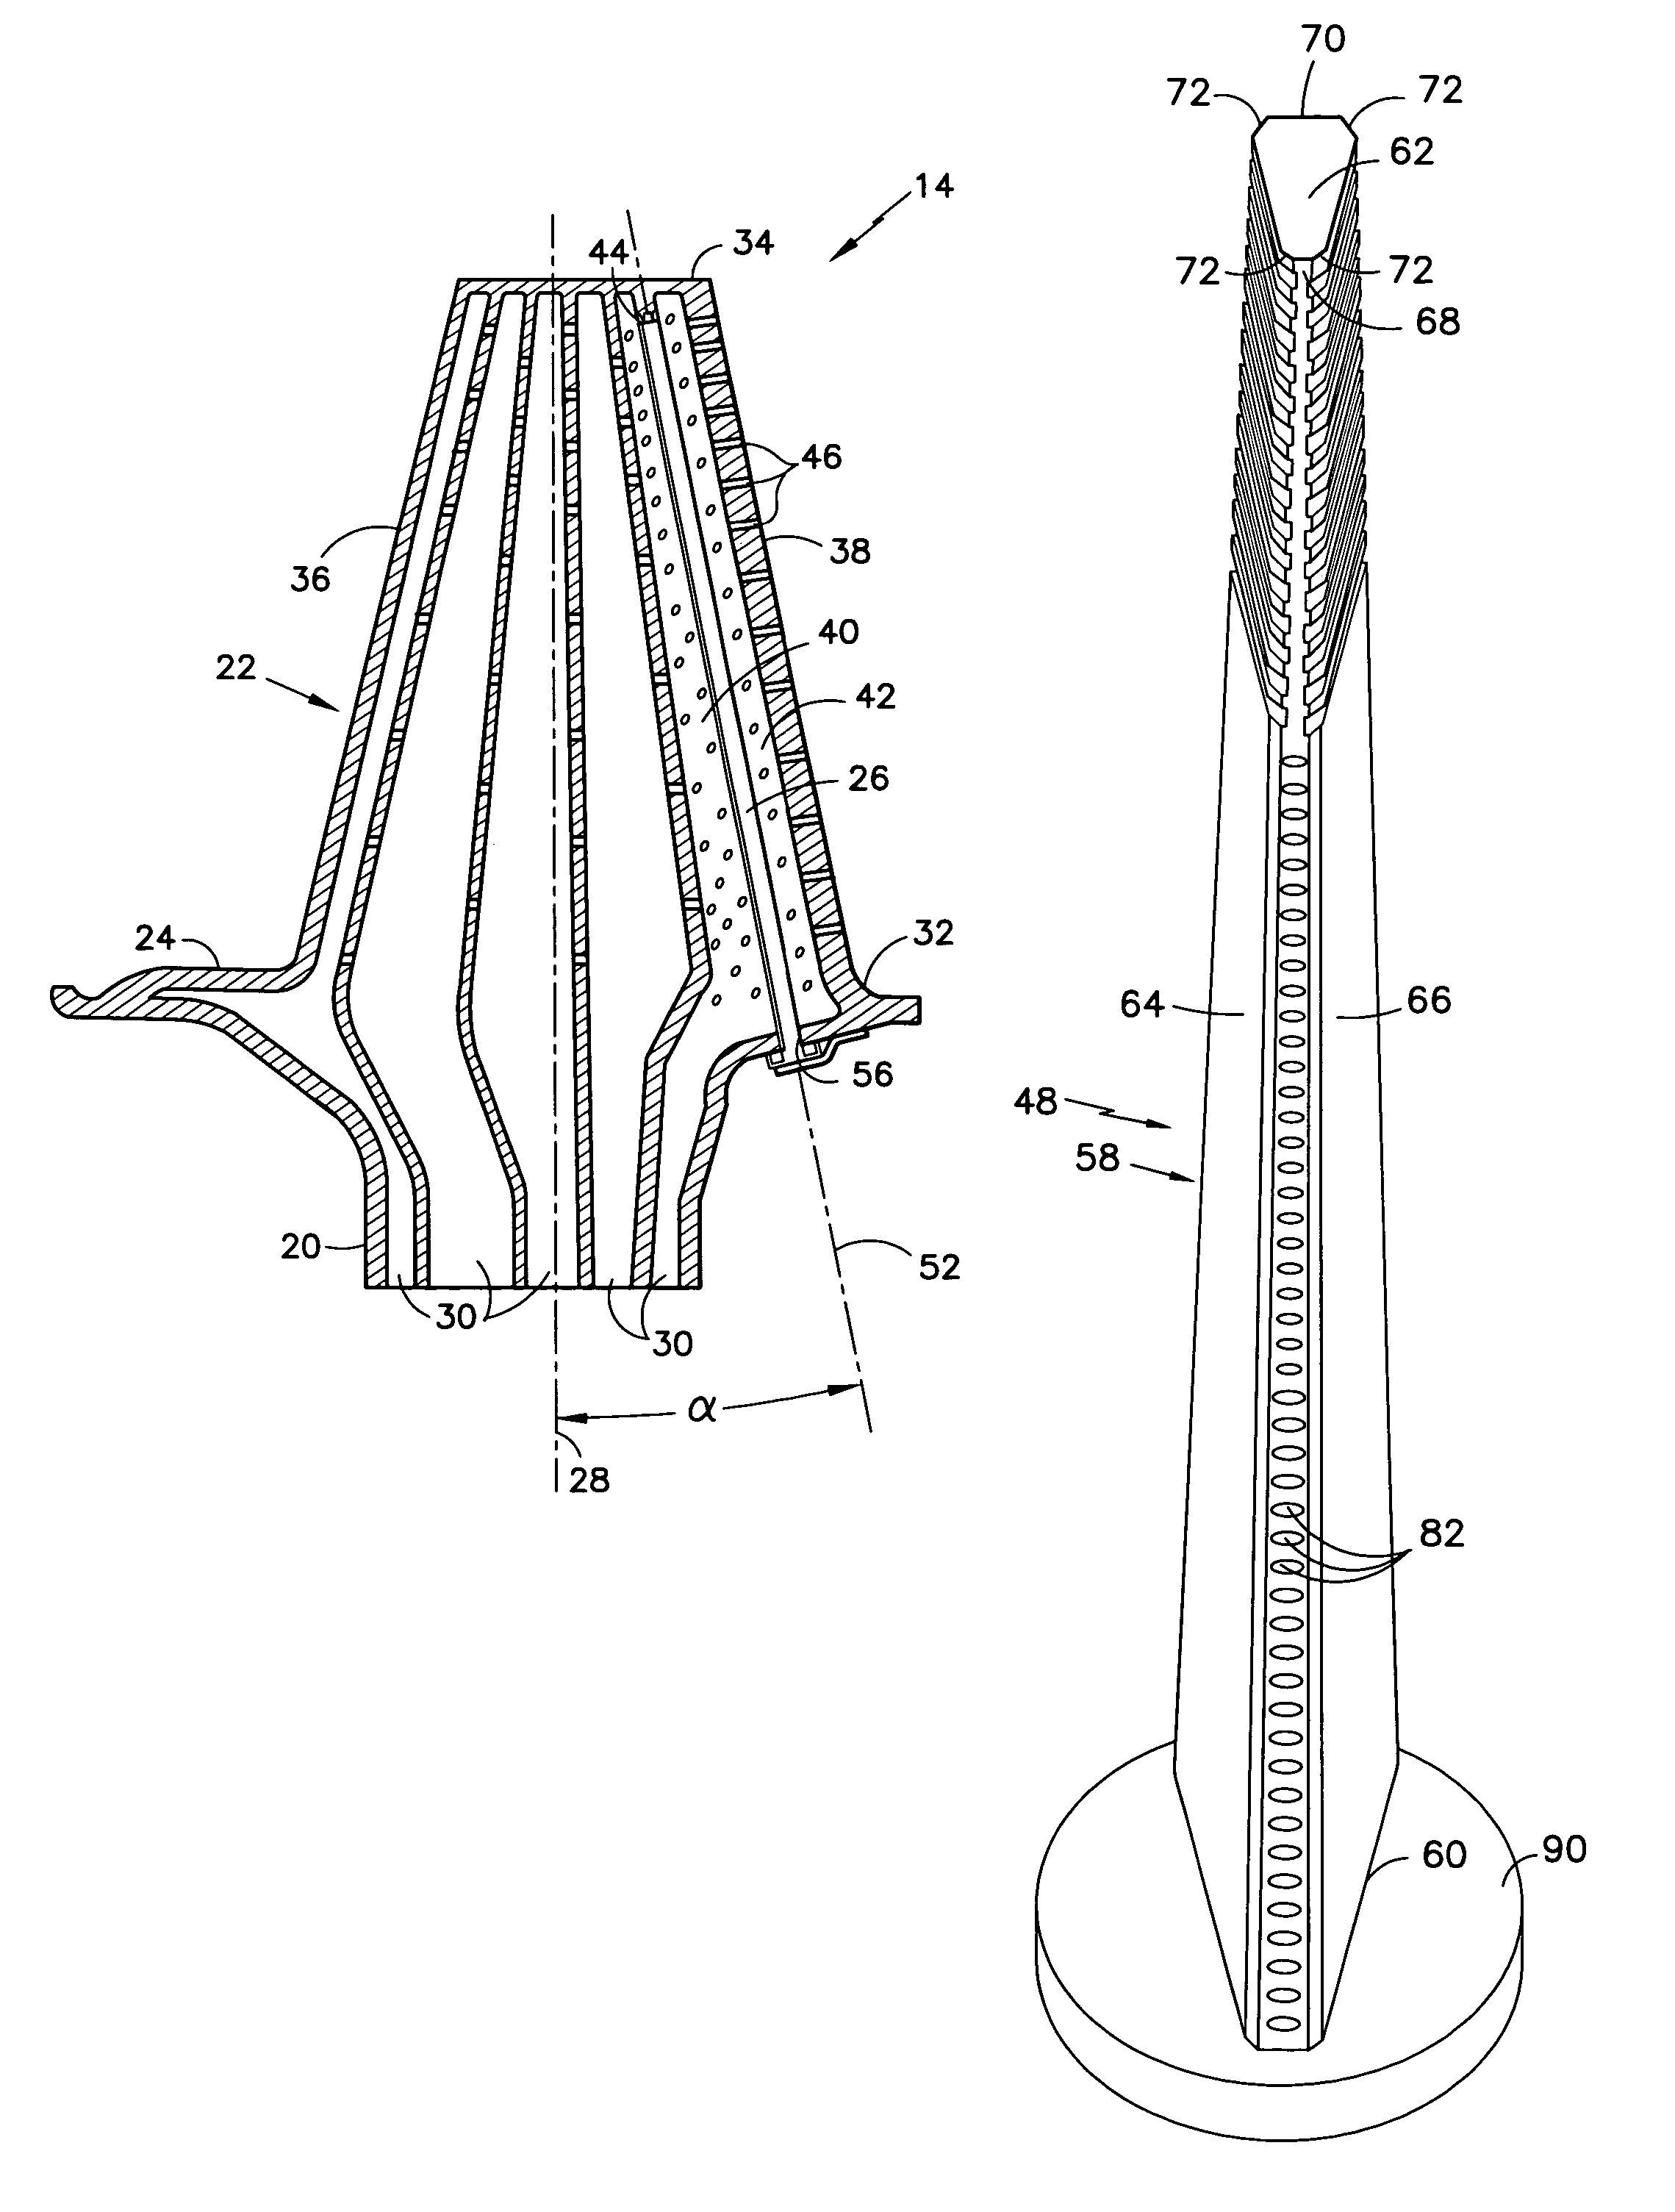 Rotor blade with a stick damper